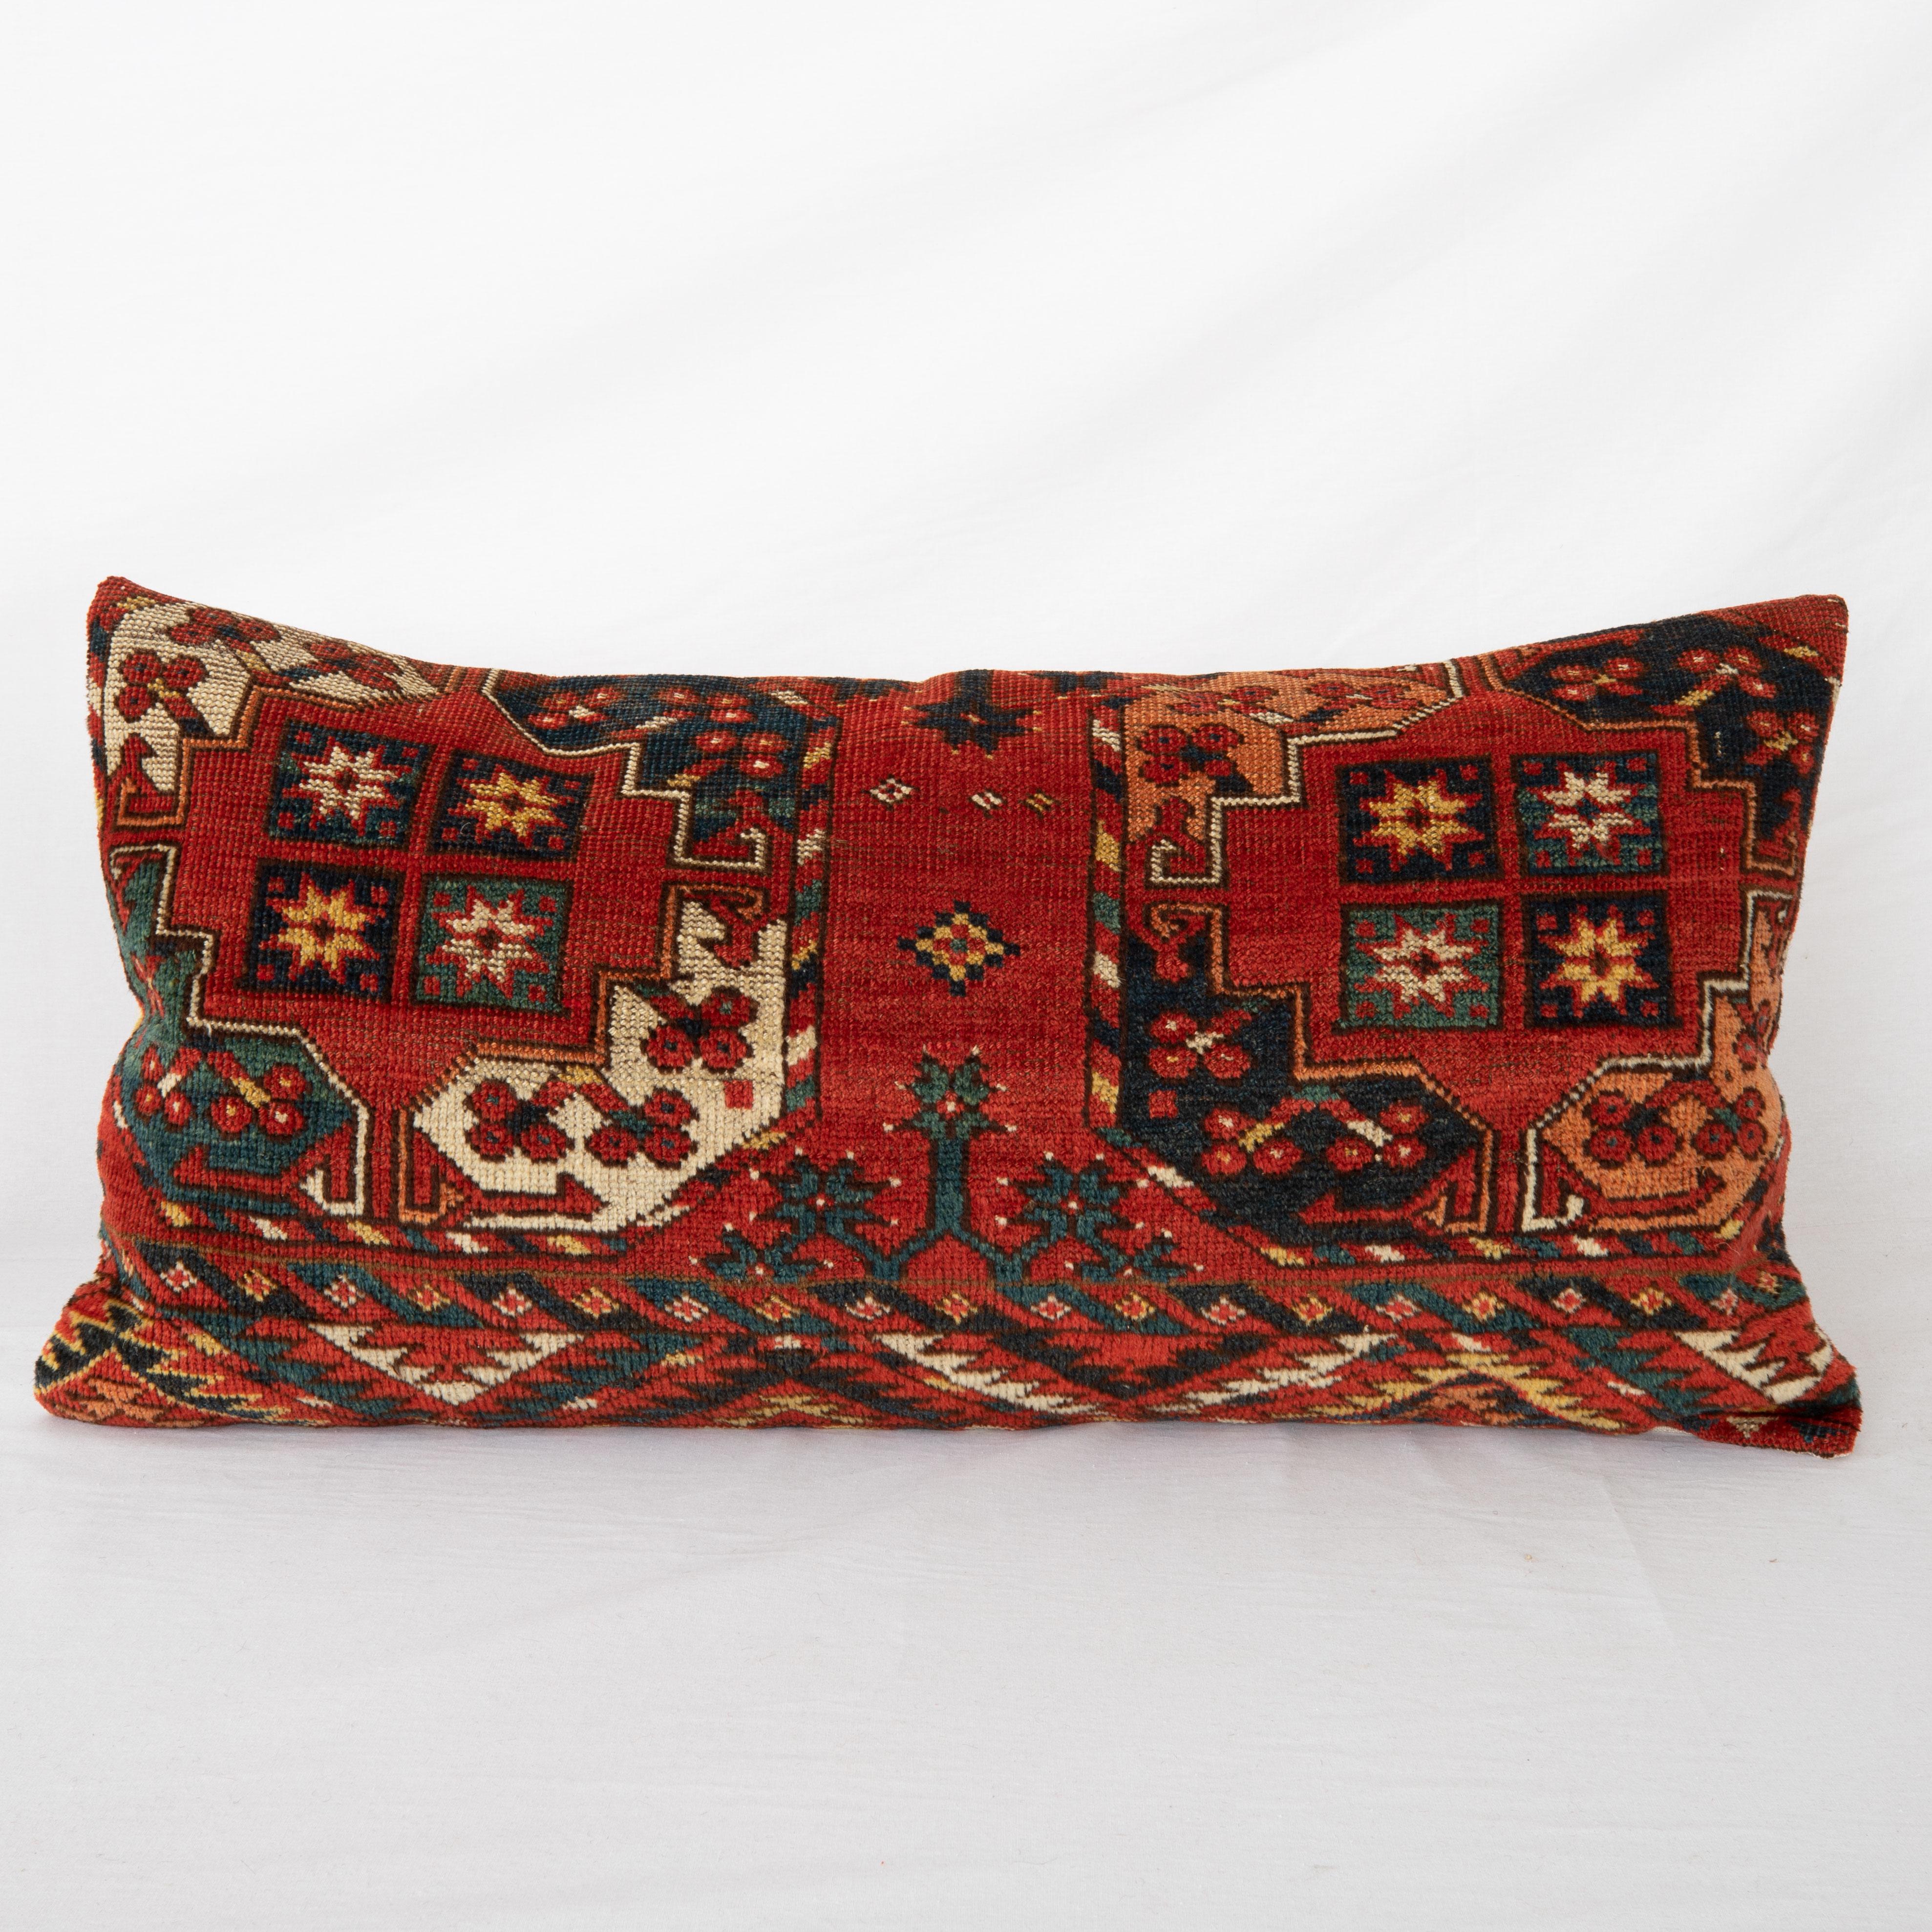 Pillowcase is made from an antique Turkmen, Ersari tribe main rug fragment dating back to 1860s.

It does not come with an insert but a bag made to size to accommodate insert materials.
Linen in the back.
Zipper Closure.
Dry Clean is